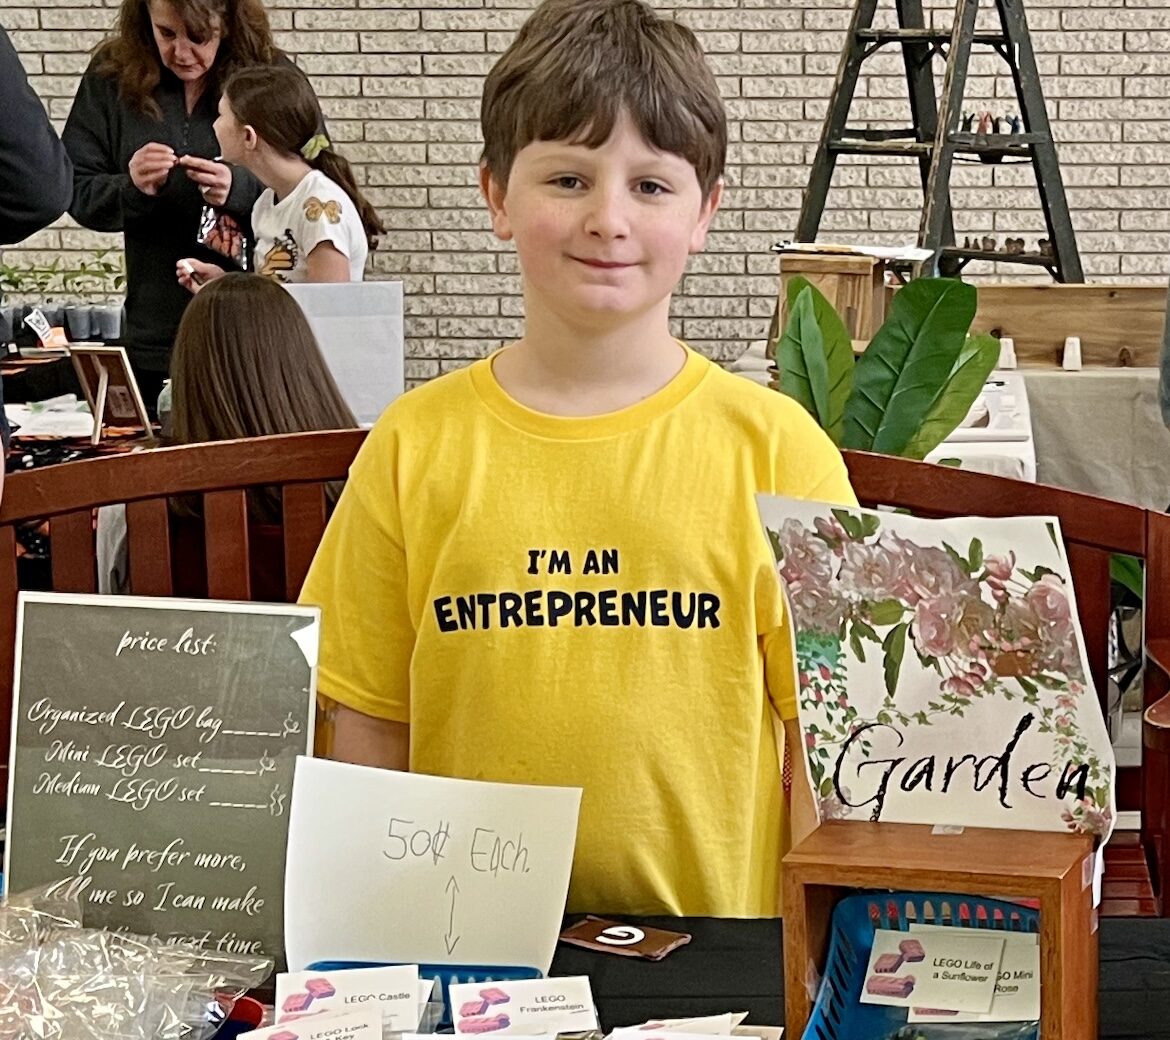 Today, we got a chance to interview Garrett - a 9-year-old creative entrepreneur who decided to start a business based on one of his favorite hobbies – building Legos!